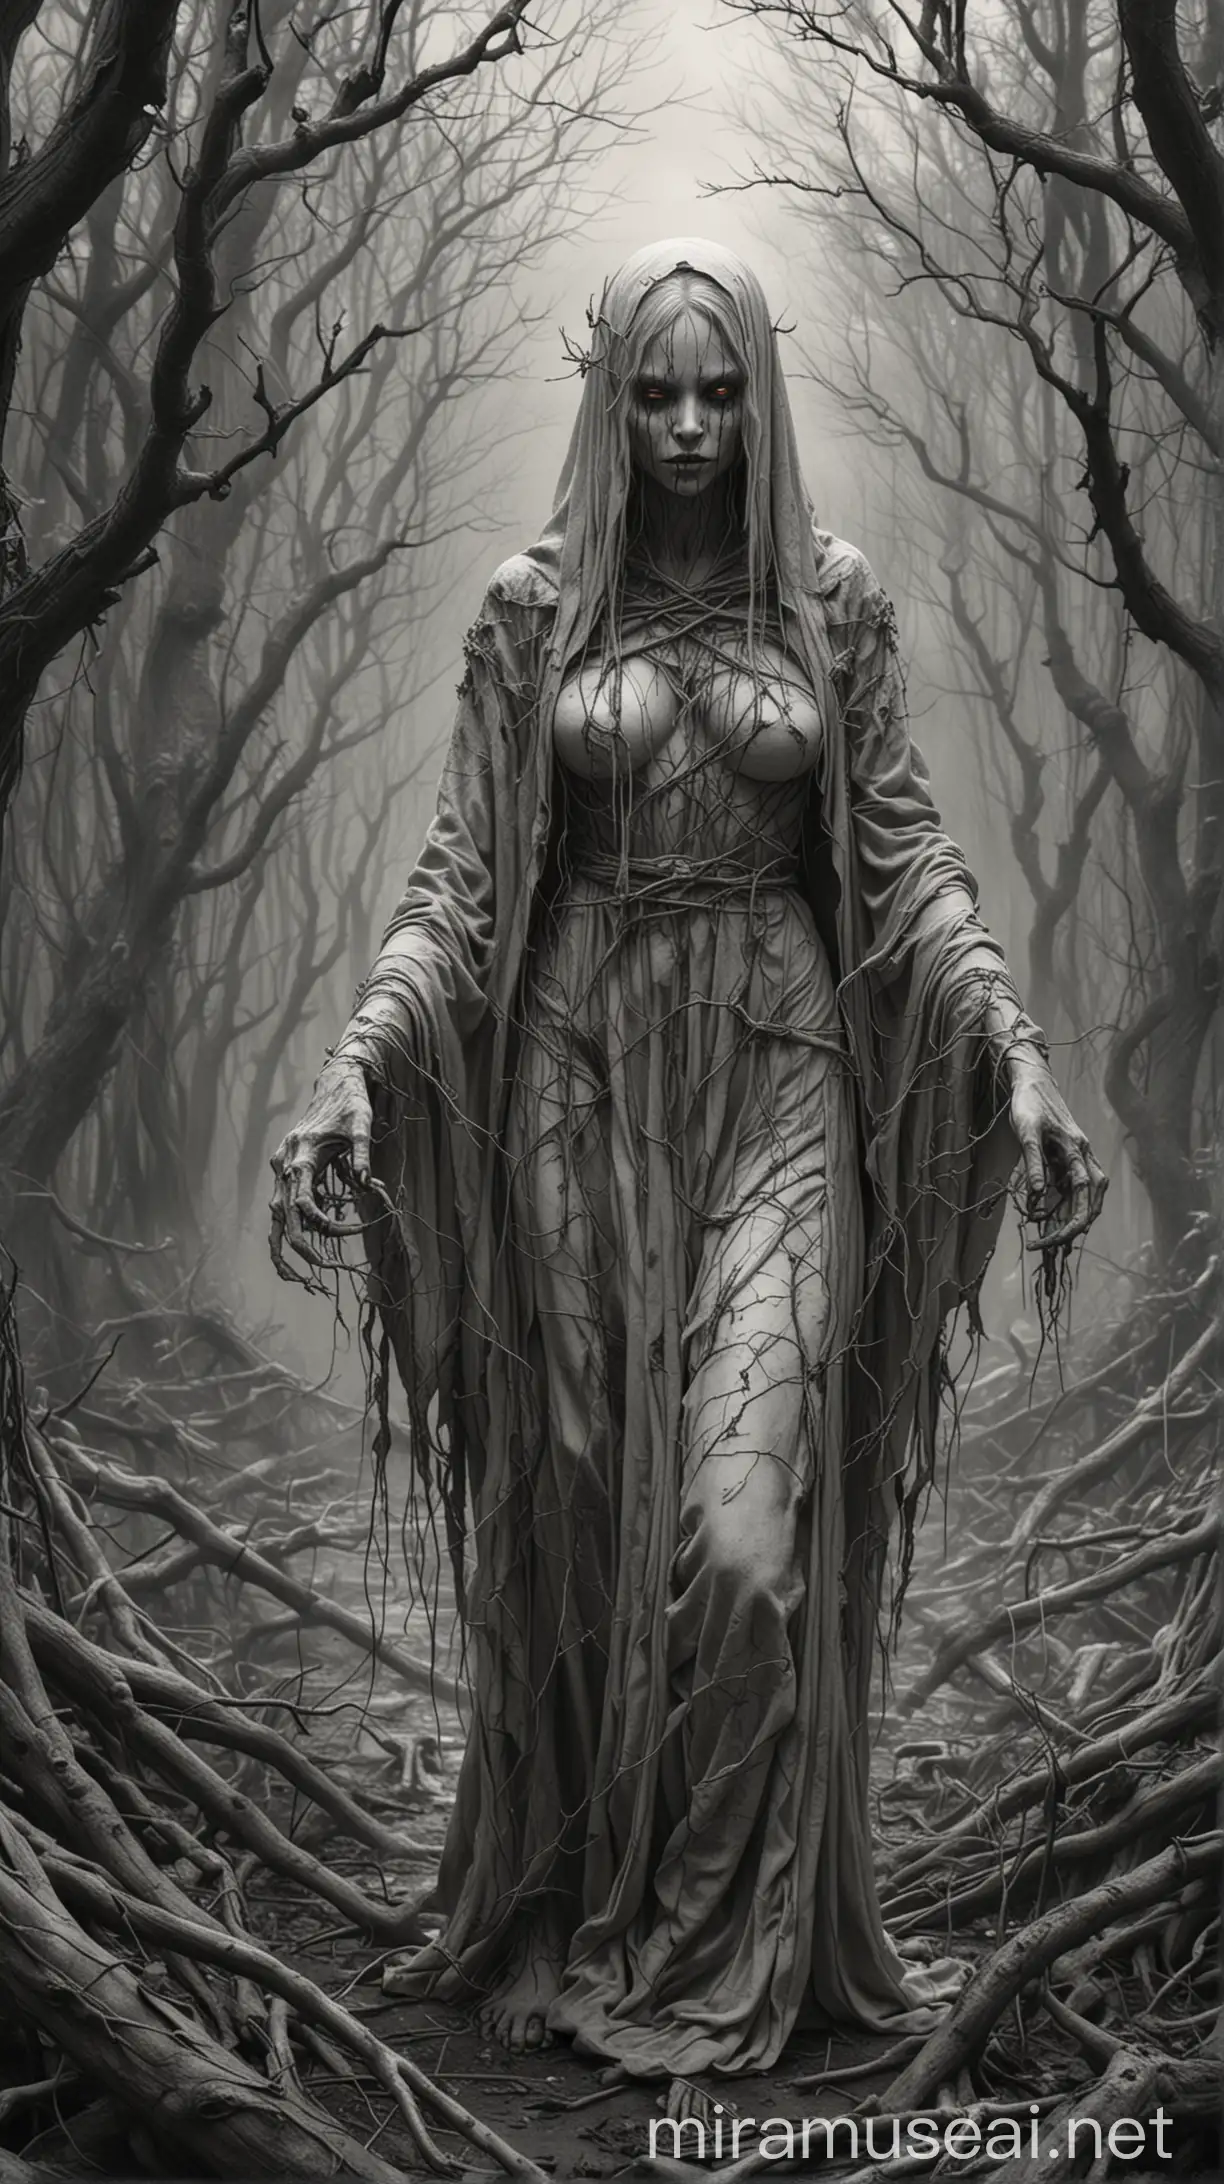 Hyper Realistic Sketch Lady Midday Ghost Demon in Branch Robe Roaming Mystical Forest